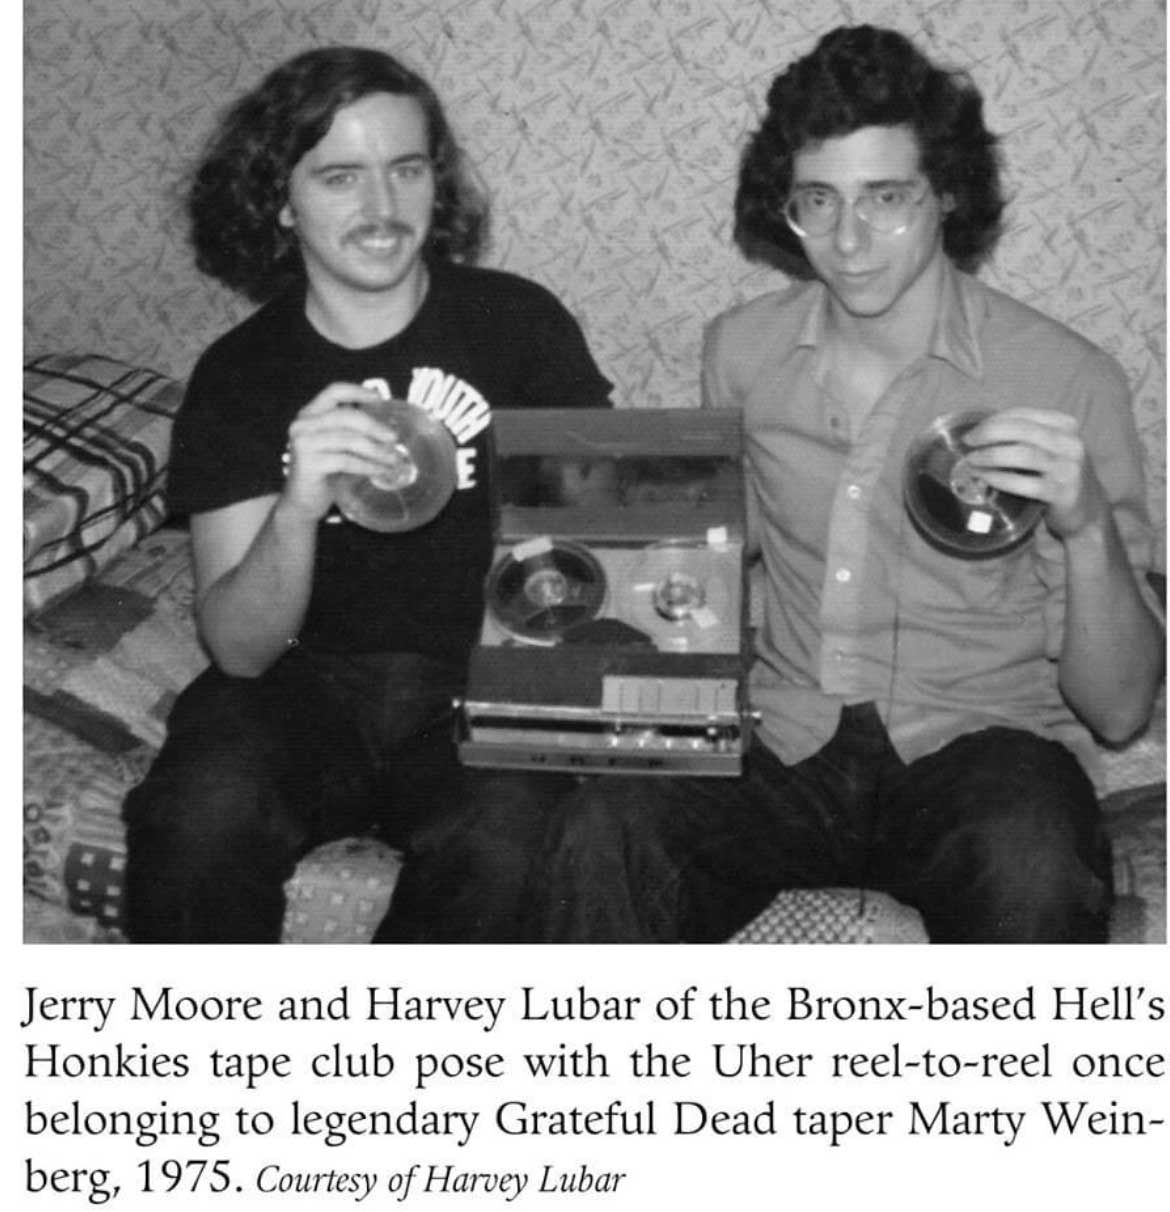 Marty Weinberg's Uher used to record the Grateful Dead 